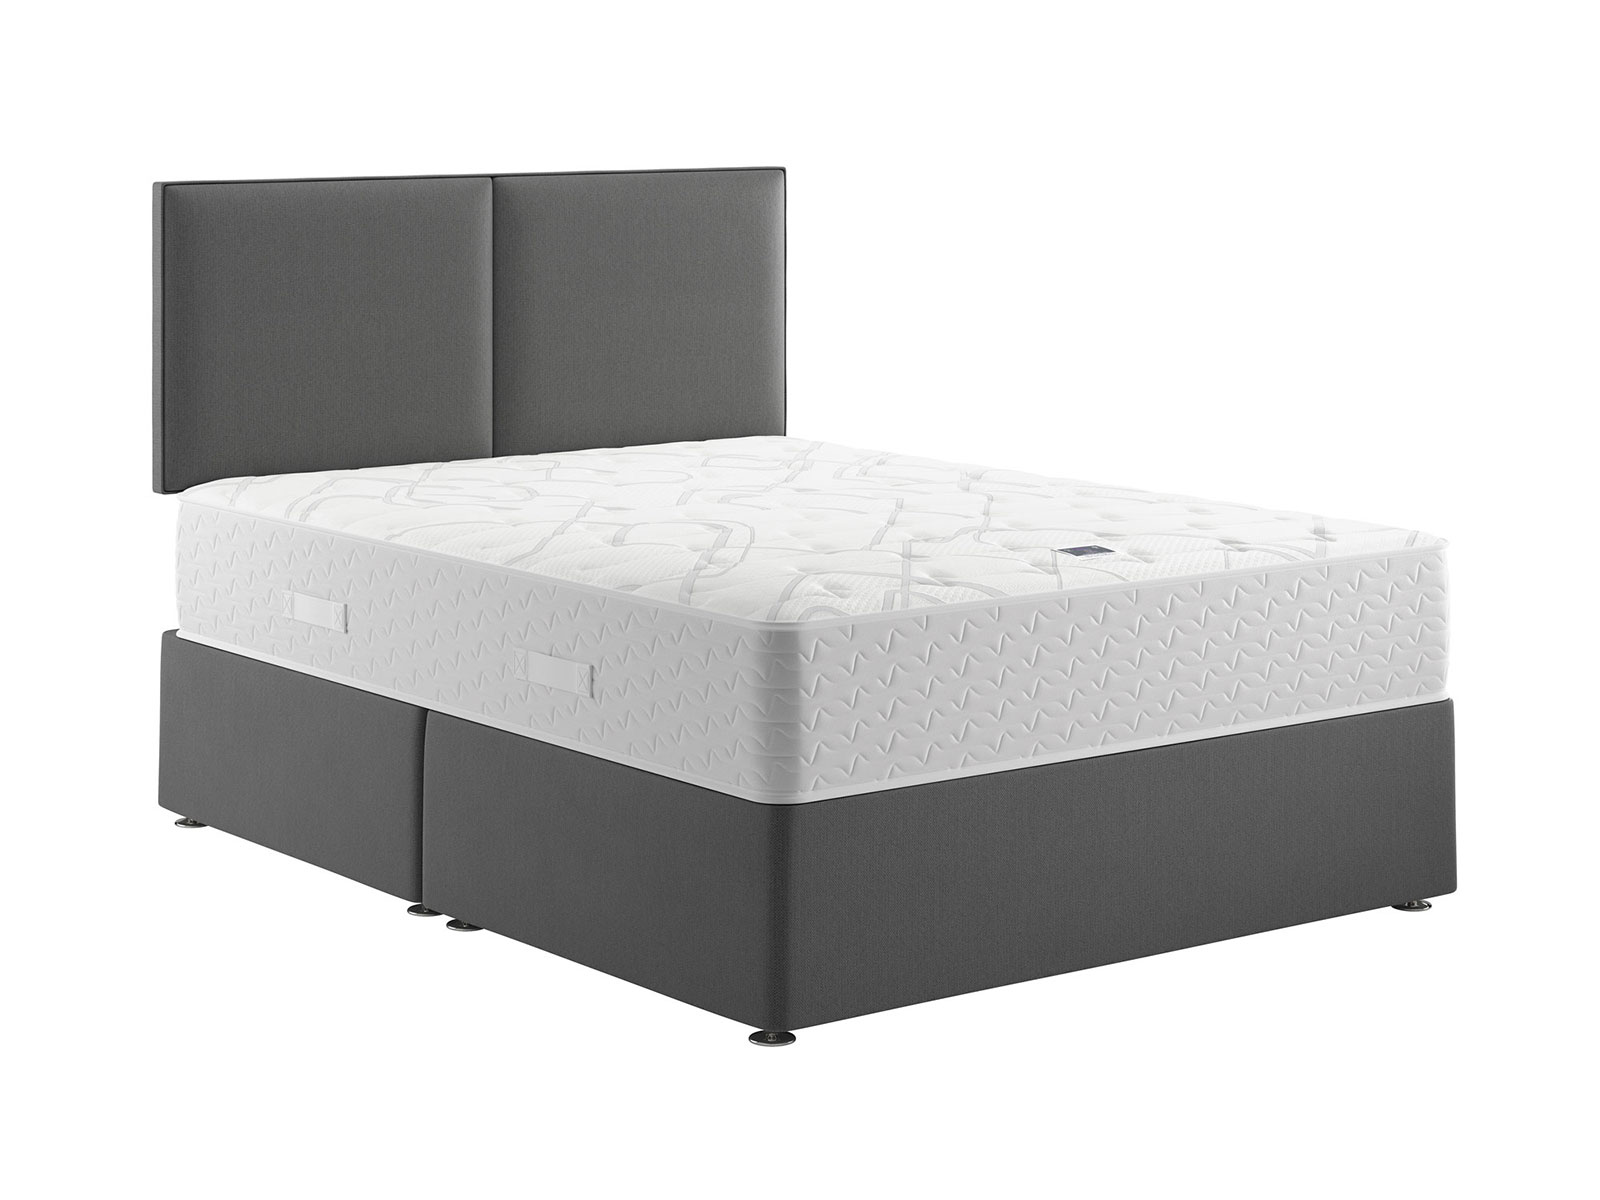 4ft6 Double Relyon Contemporary Comfort 1000 Mattress